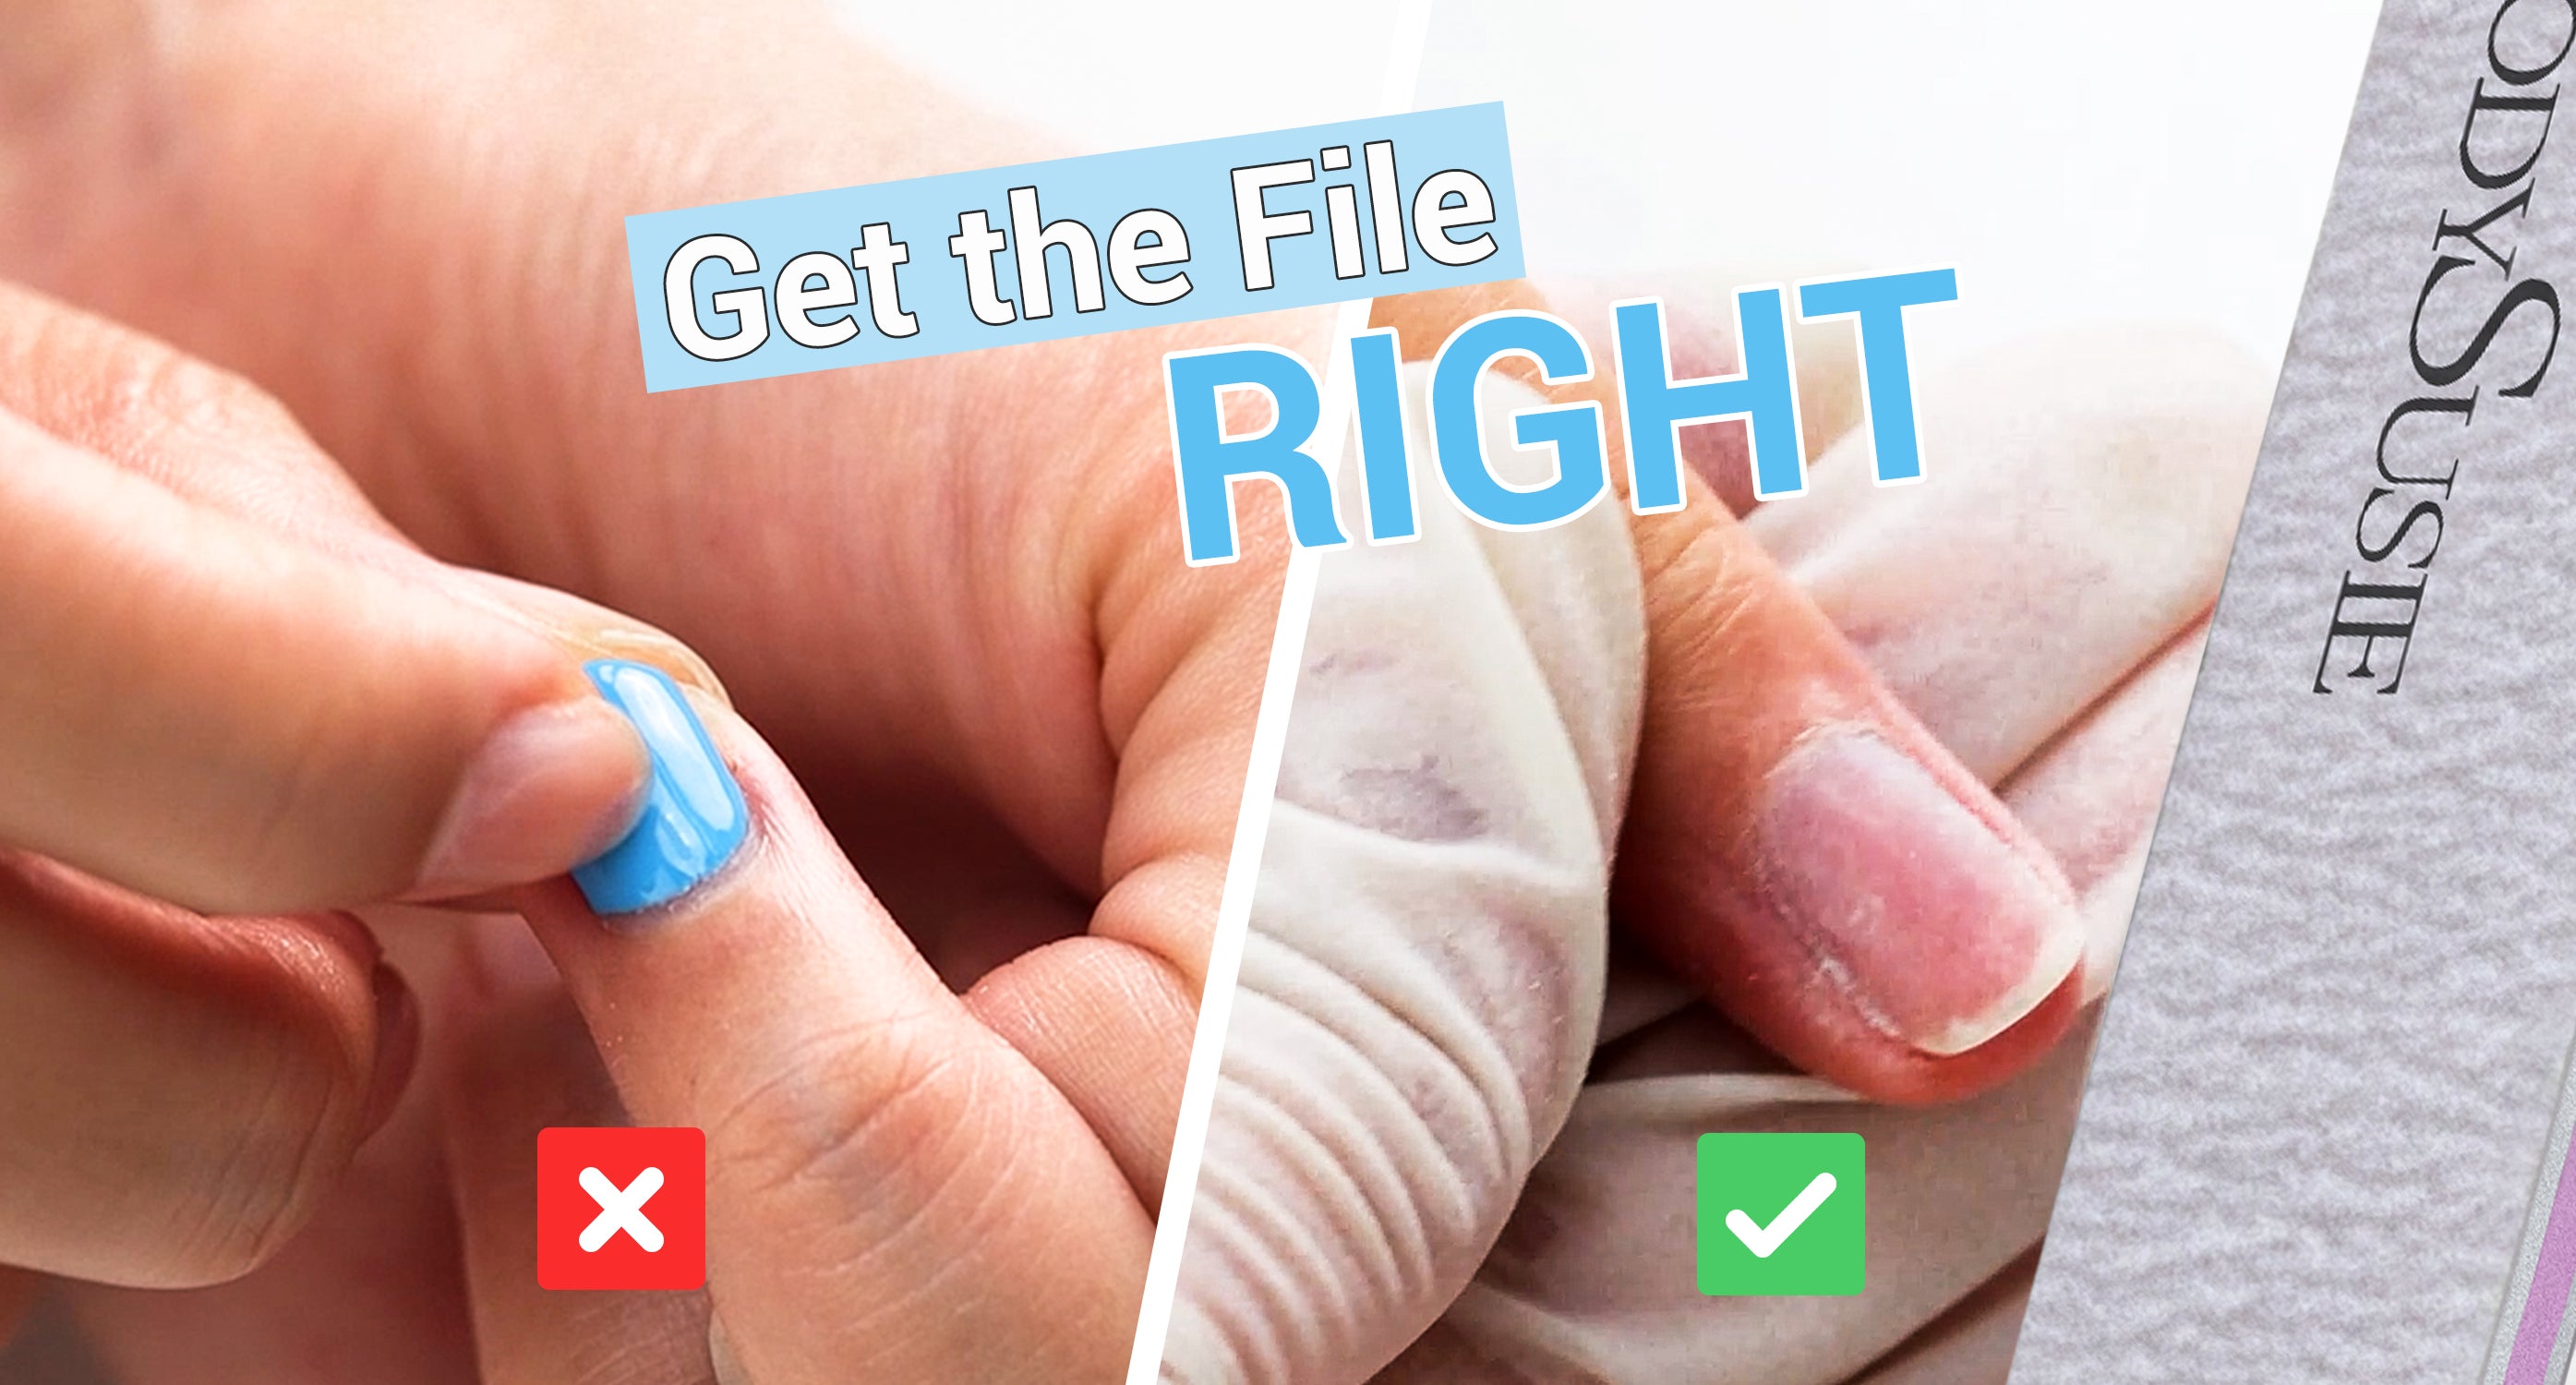 Get the File Right: Common Nail File Questions Answered